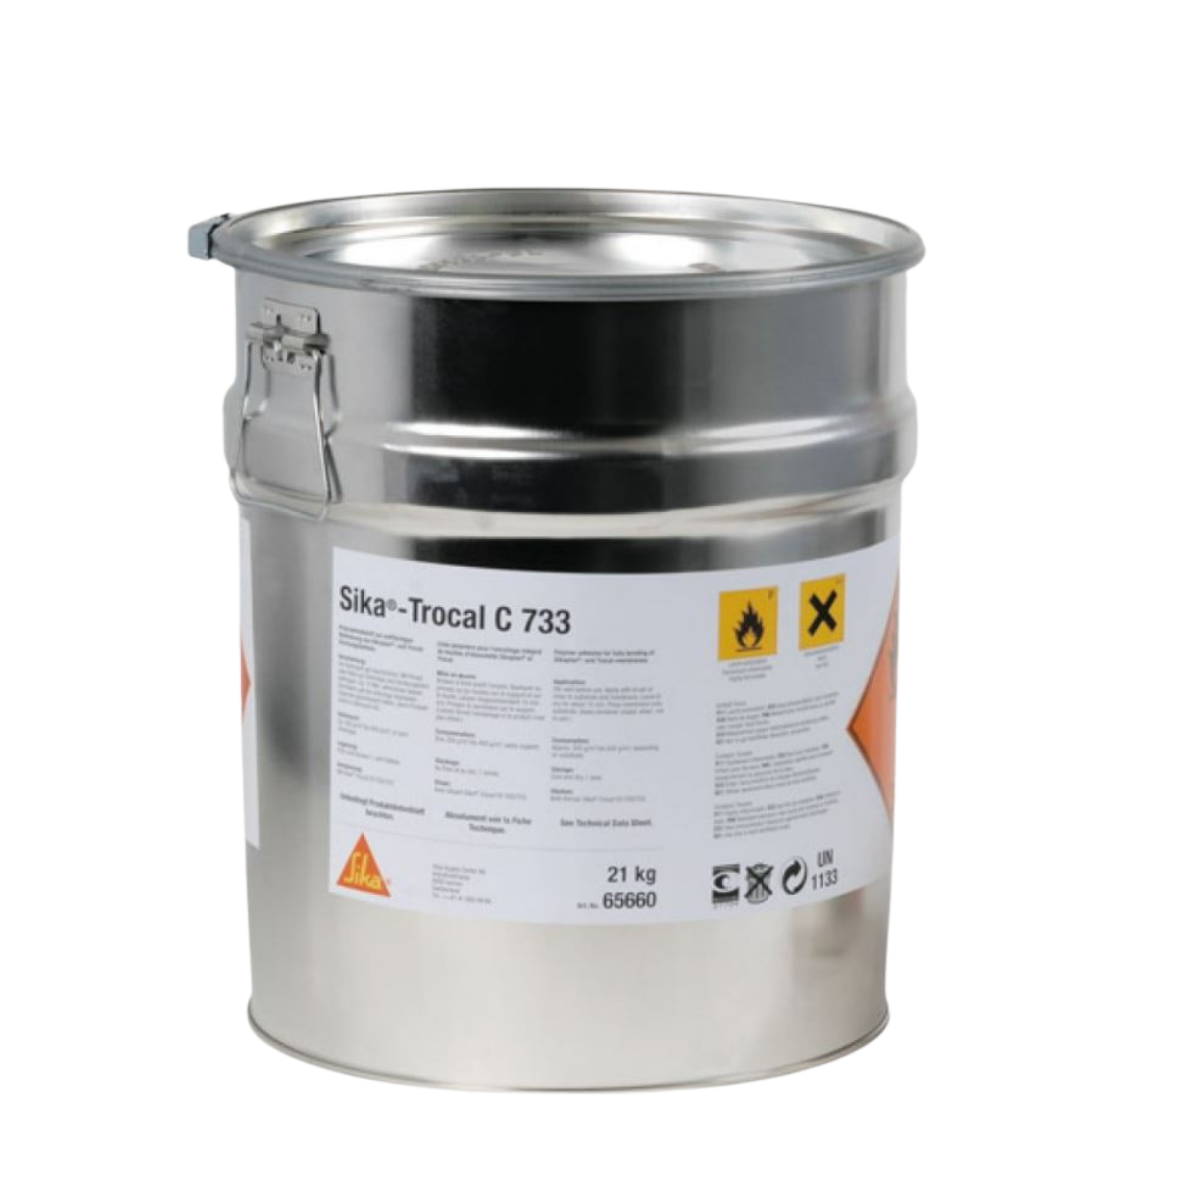 Products for waterproofing and sealing - Contact Adhesive Sika Trocal C733 20kg, https:maxbau.ro